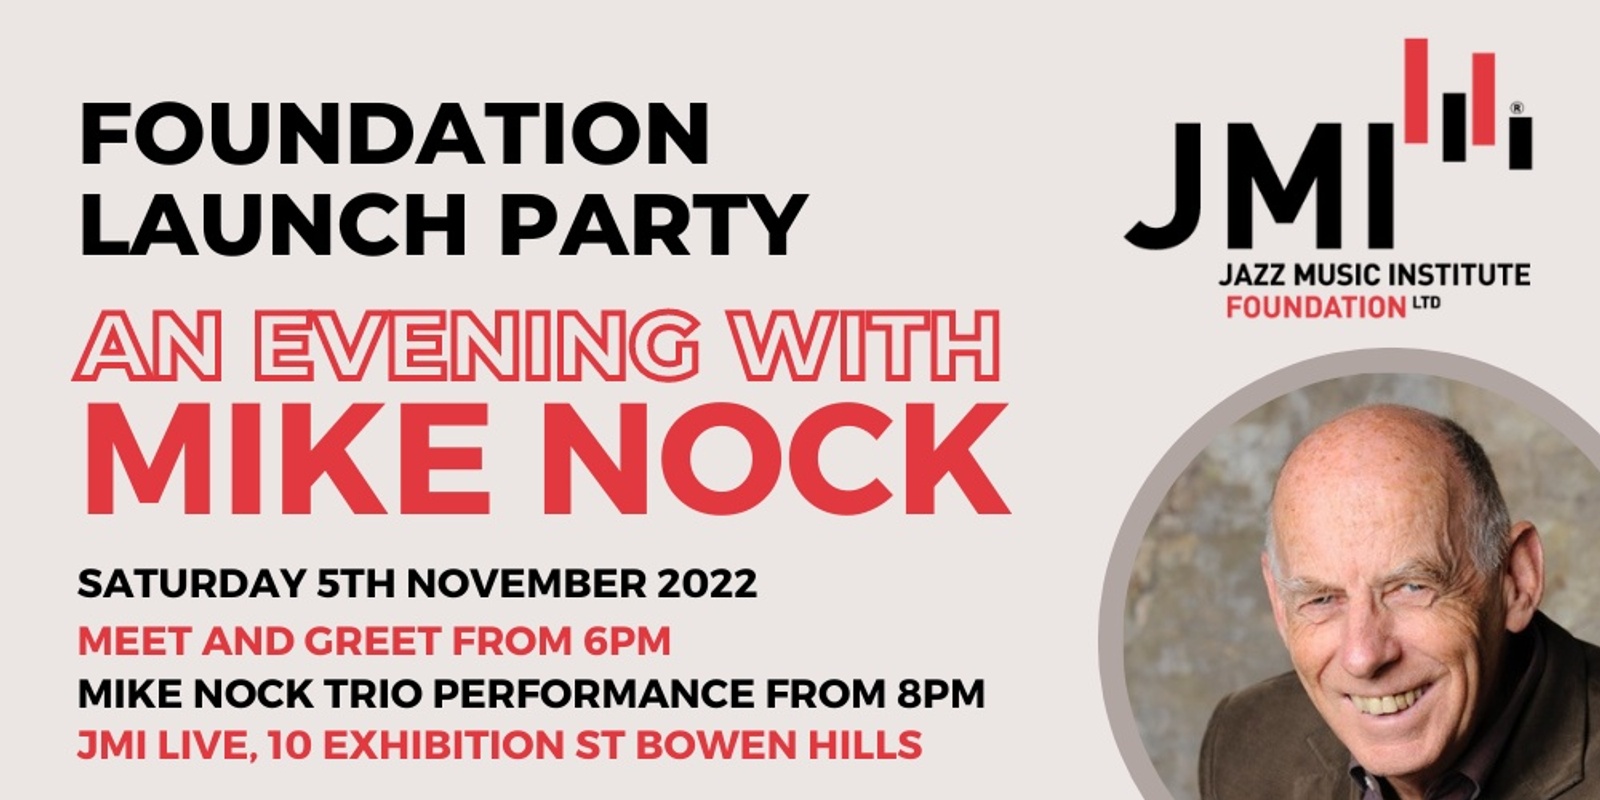 Banner image for JMI Foundation Launch Party - An Evening with Mike Nock